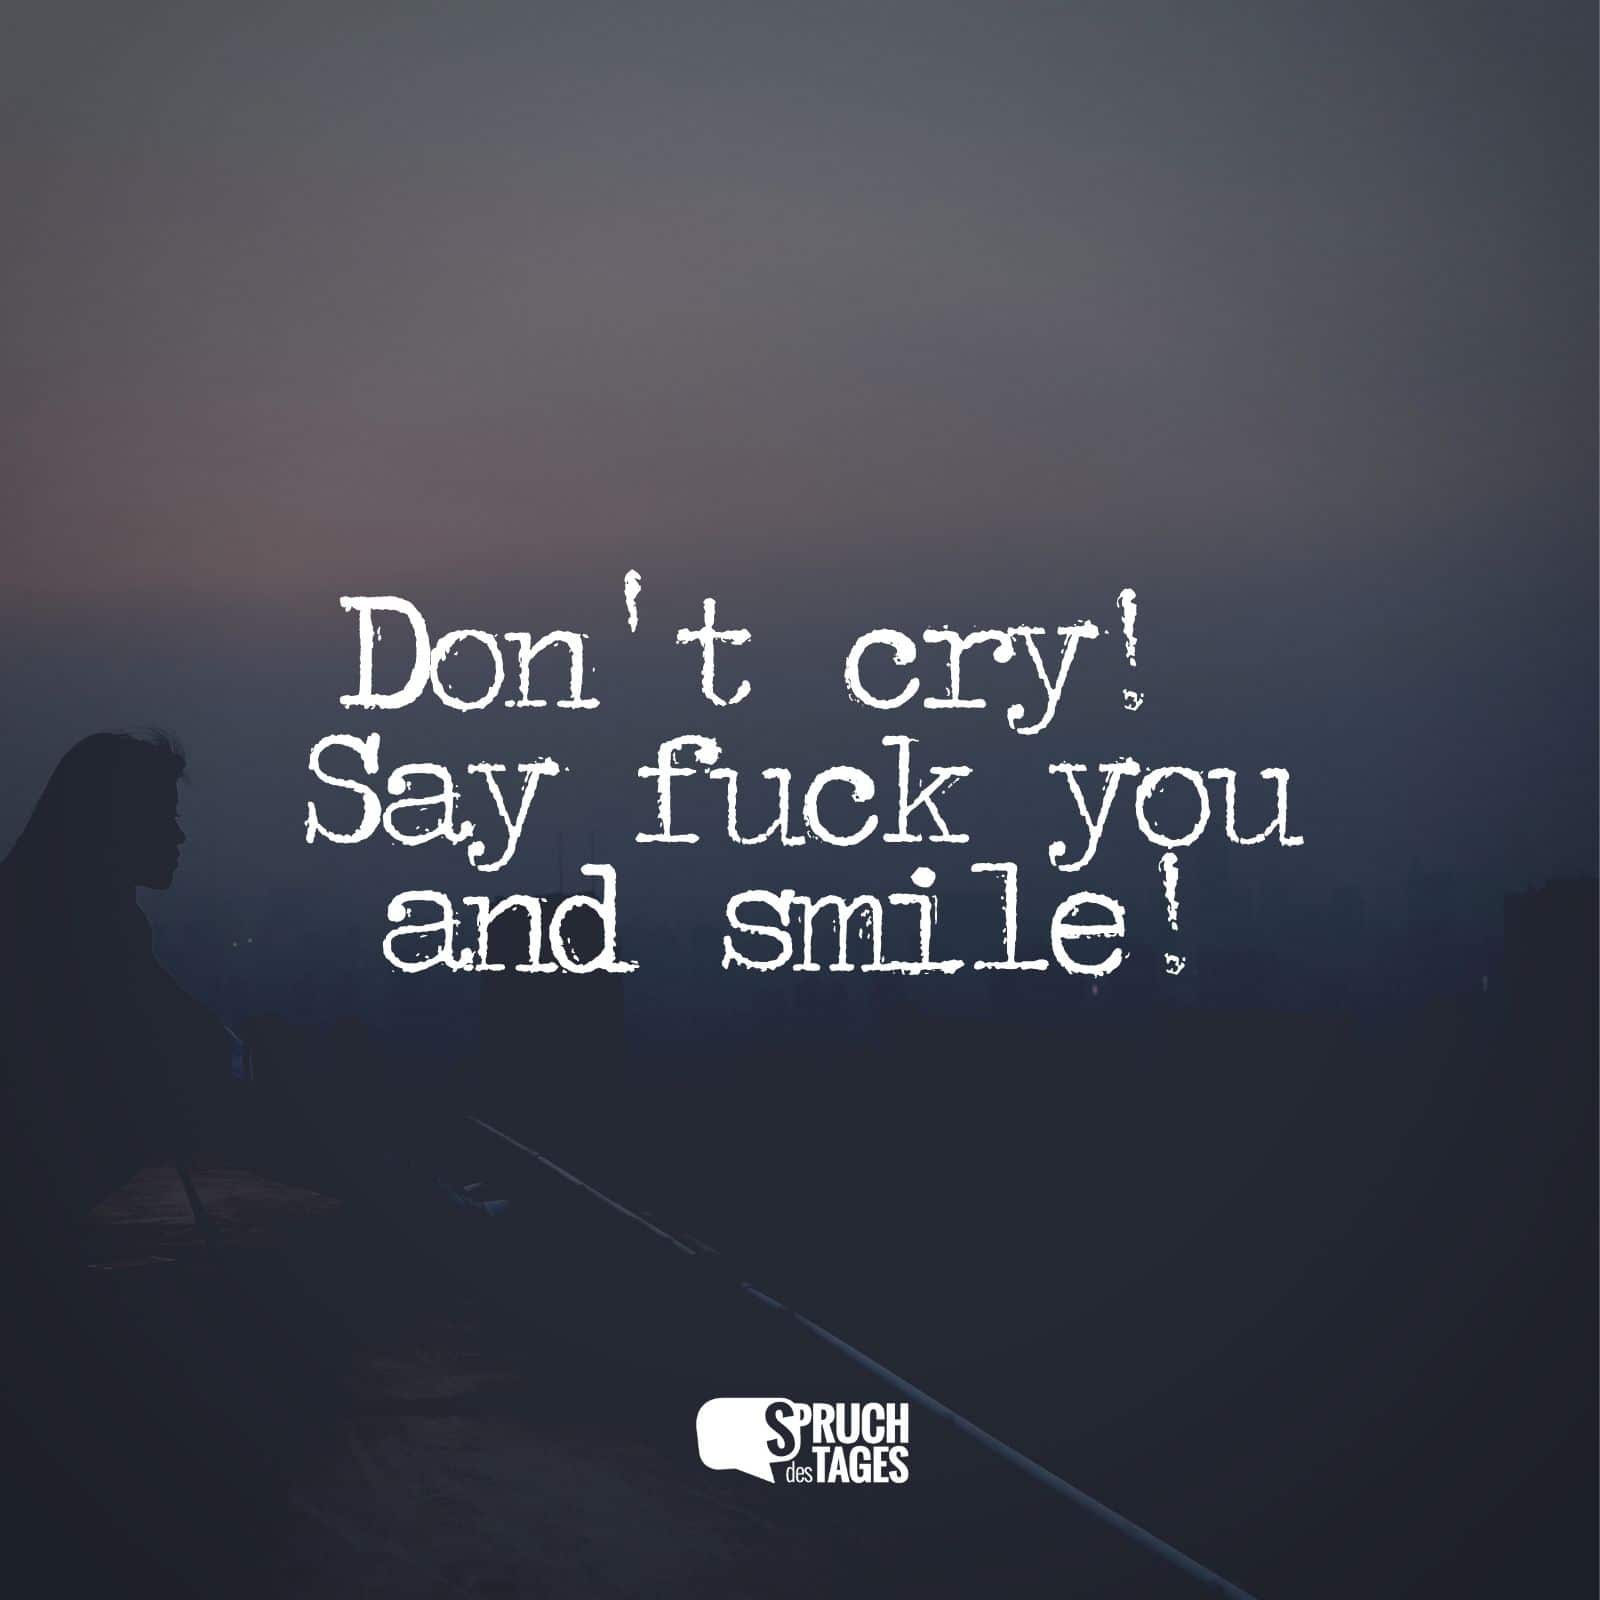 Don’t cry! Say fuck you and smile!